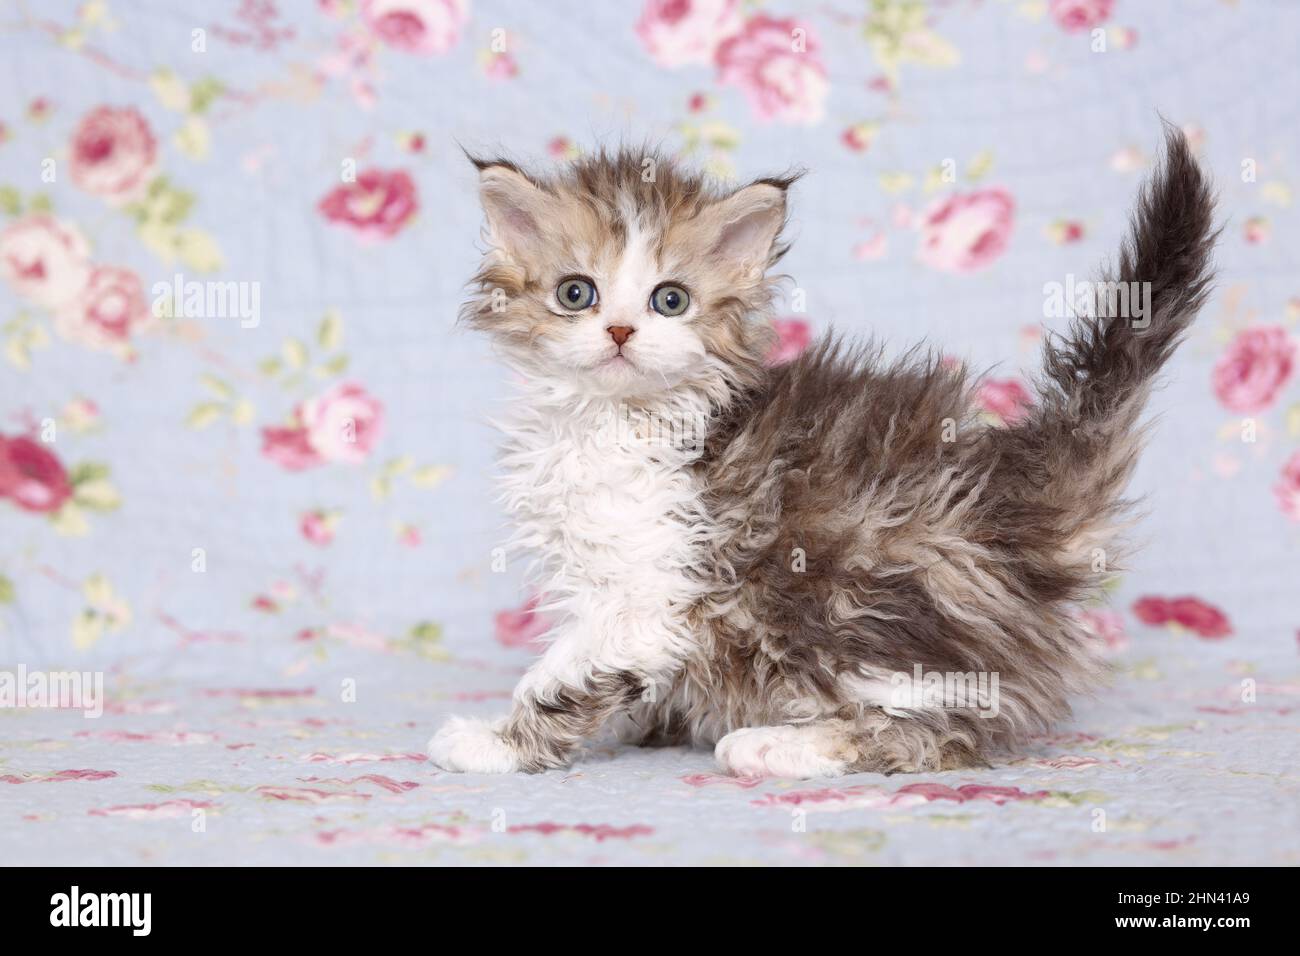 Selkirk Rex. Kitten standing on a blanket with flower print. Studio picture. Germany Stock Photo